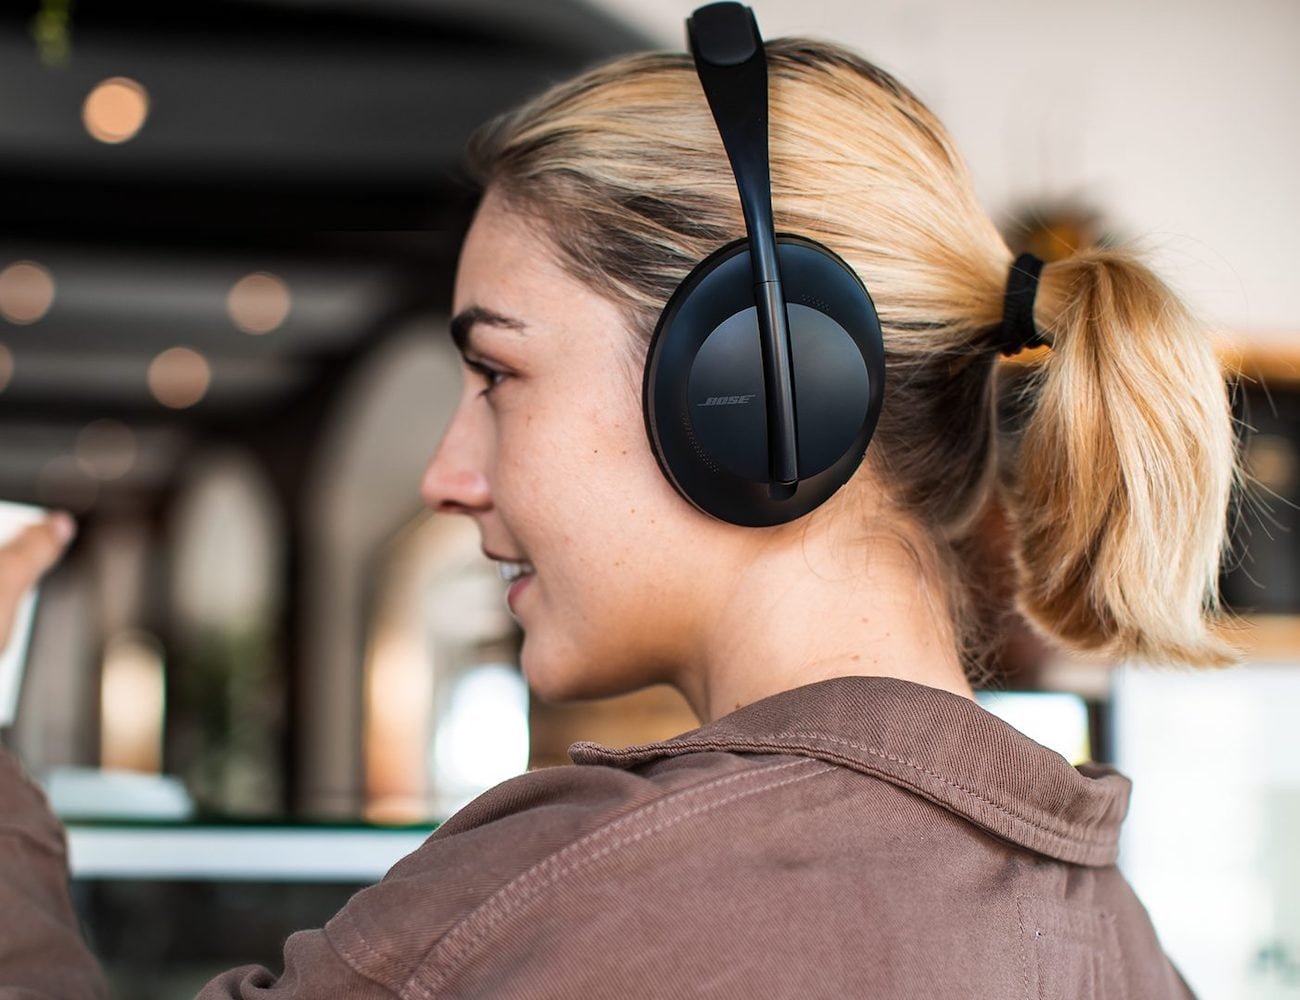 Bose Noise-Cancelling Headphones 700 offer integrated augmented reality technology